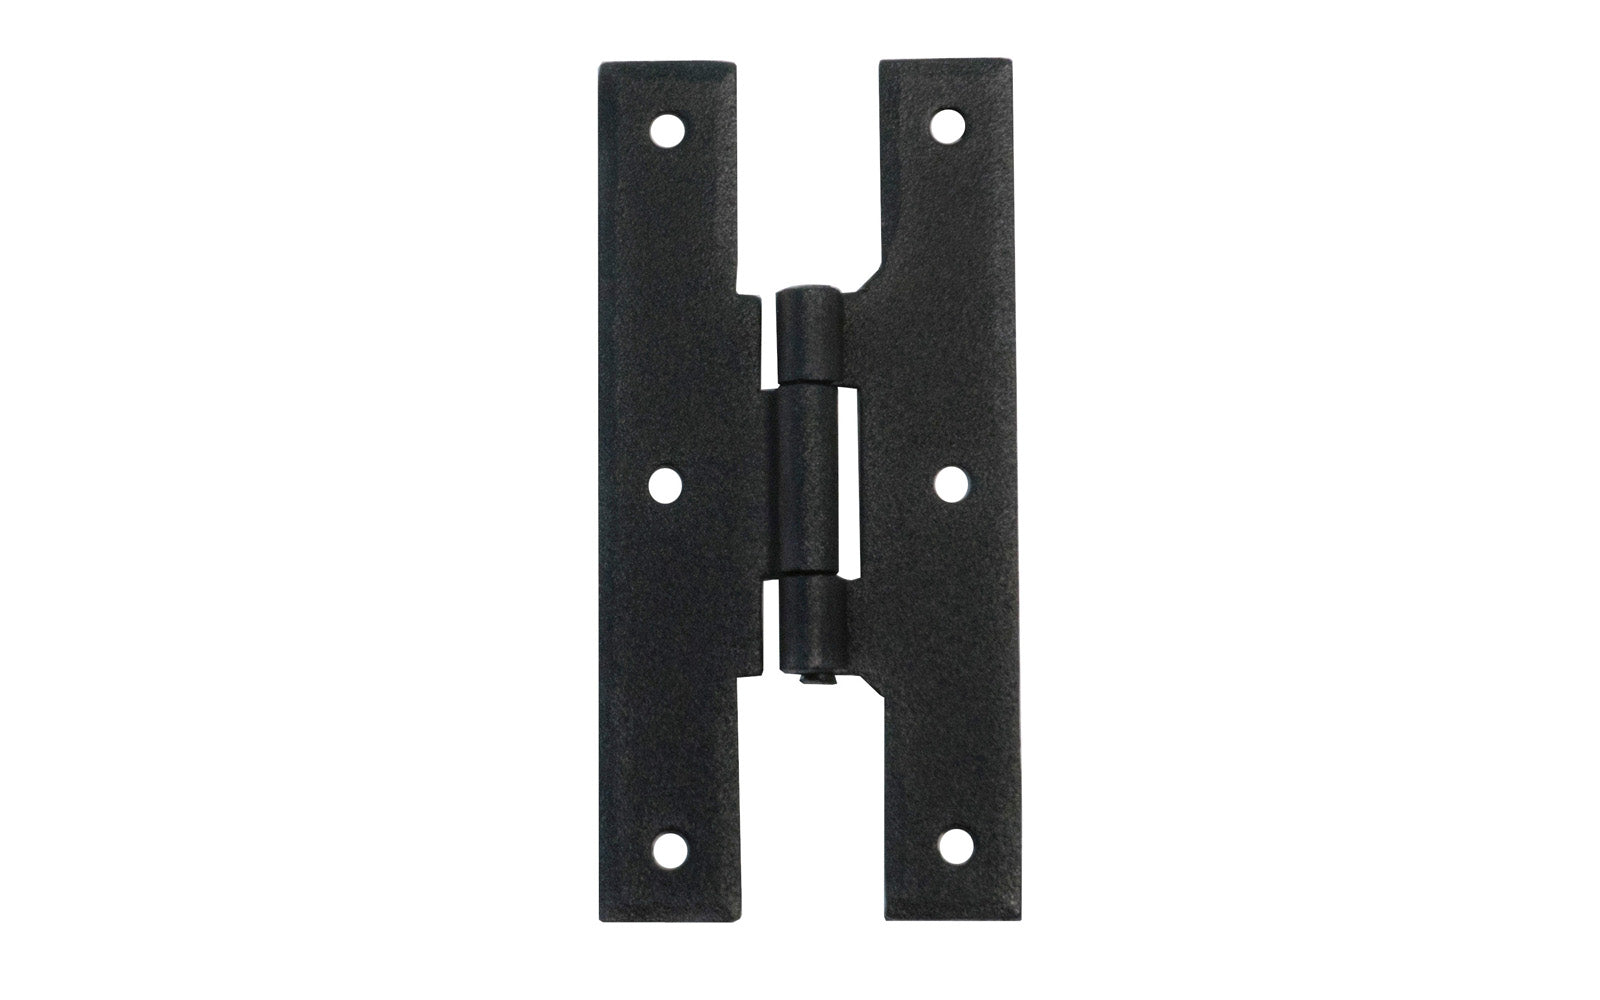 4" Forged Steel H Hinges with a vintage-style looking black powder coated finish. Made of sturdy forged steel material. The H hinge can be used on cabinets & doors, etc. Sold in as a pair - Two total hinges. Includes twelve Phillips flat head screws. Model 88586.